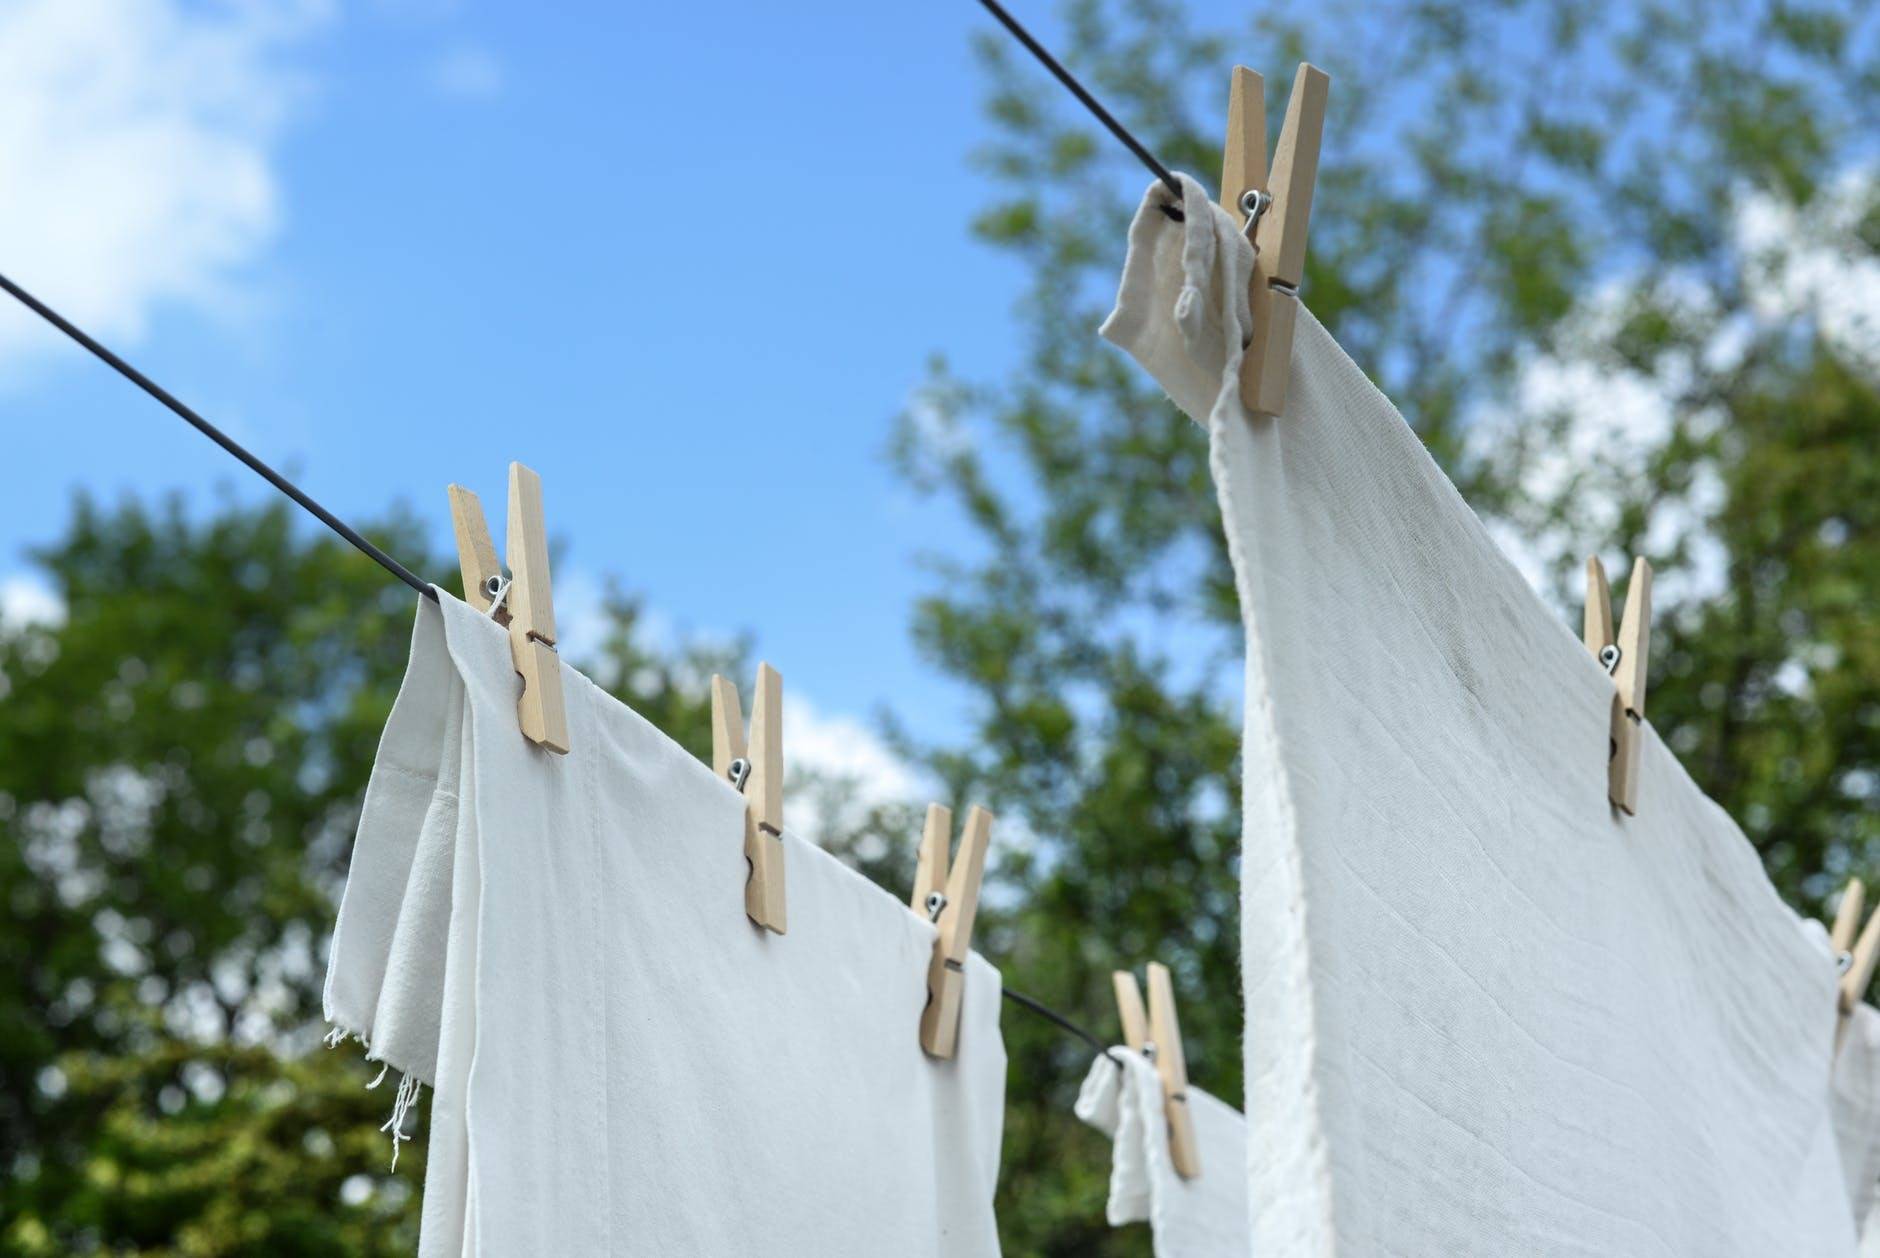 Some fabric sheets on a clothesline held up by several clothespins.